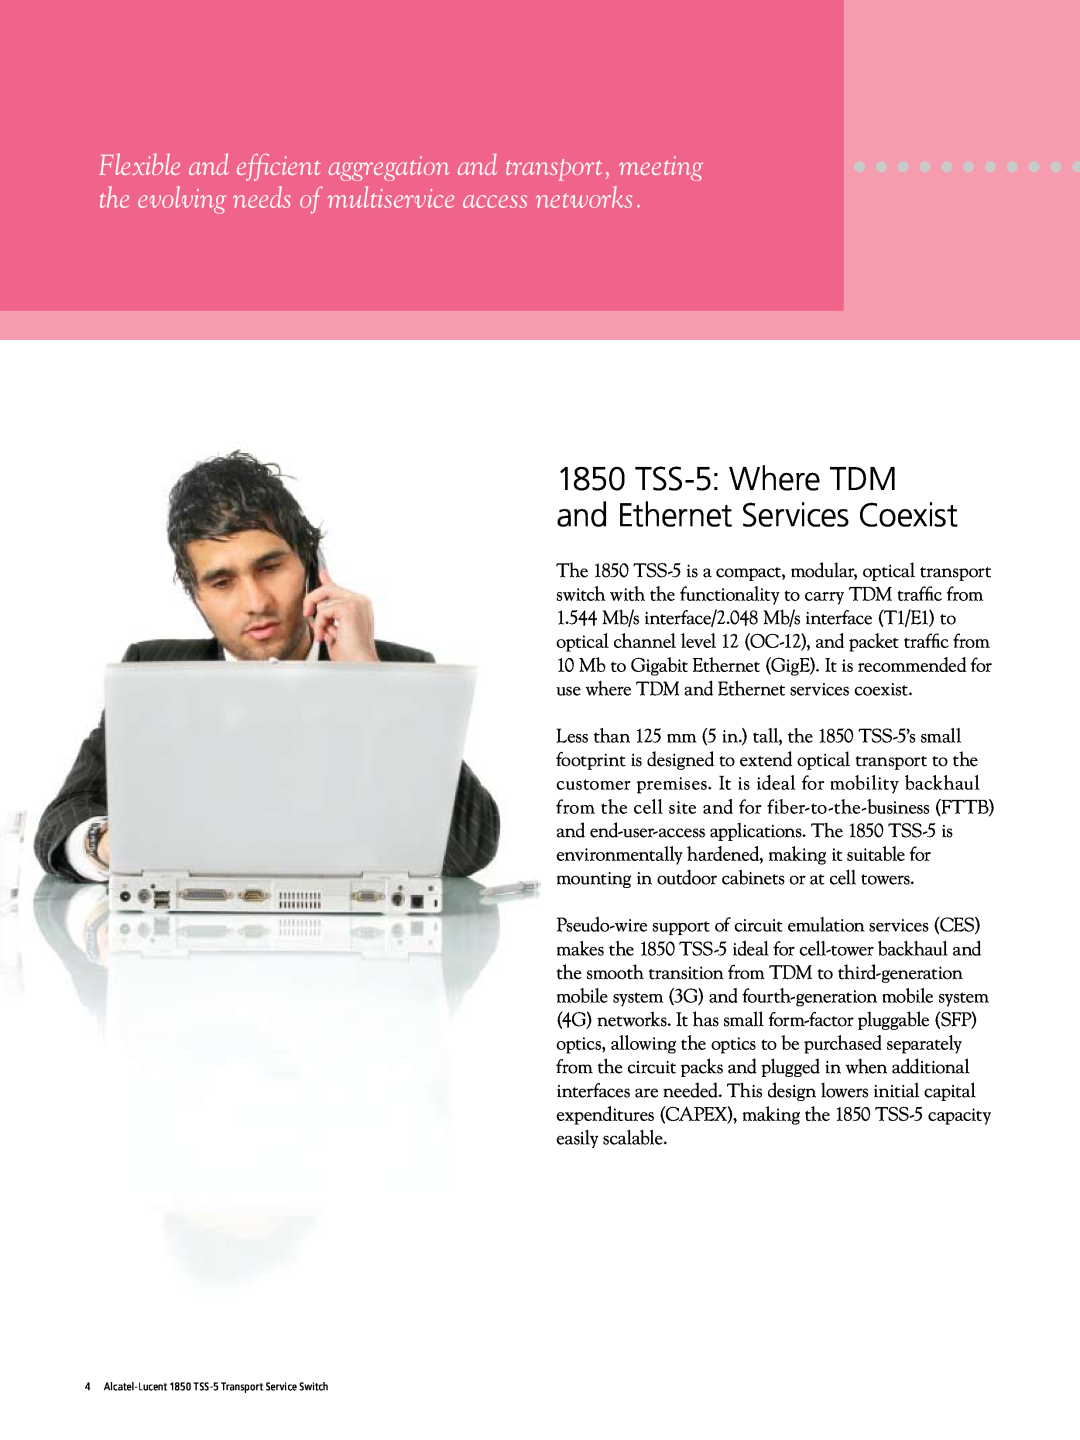 Alcatel-Lucent 1850 TSS-5 manual TSS-5 Where TDM and Ethernet Services Coexist 